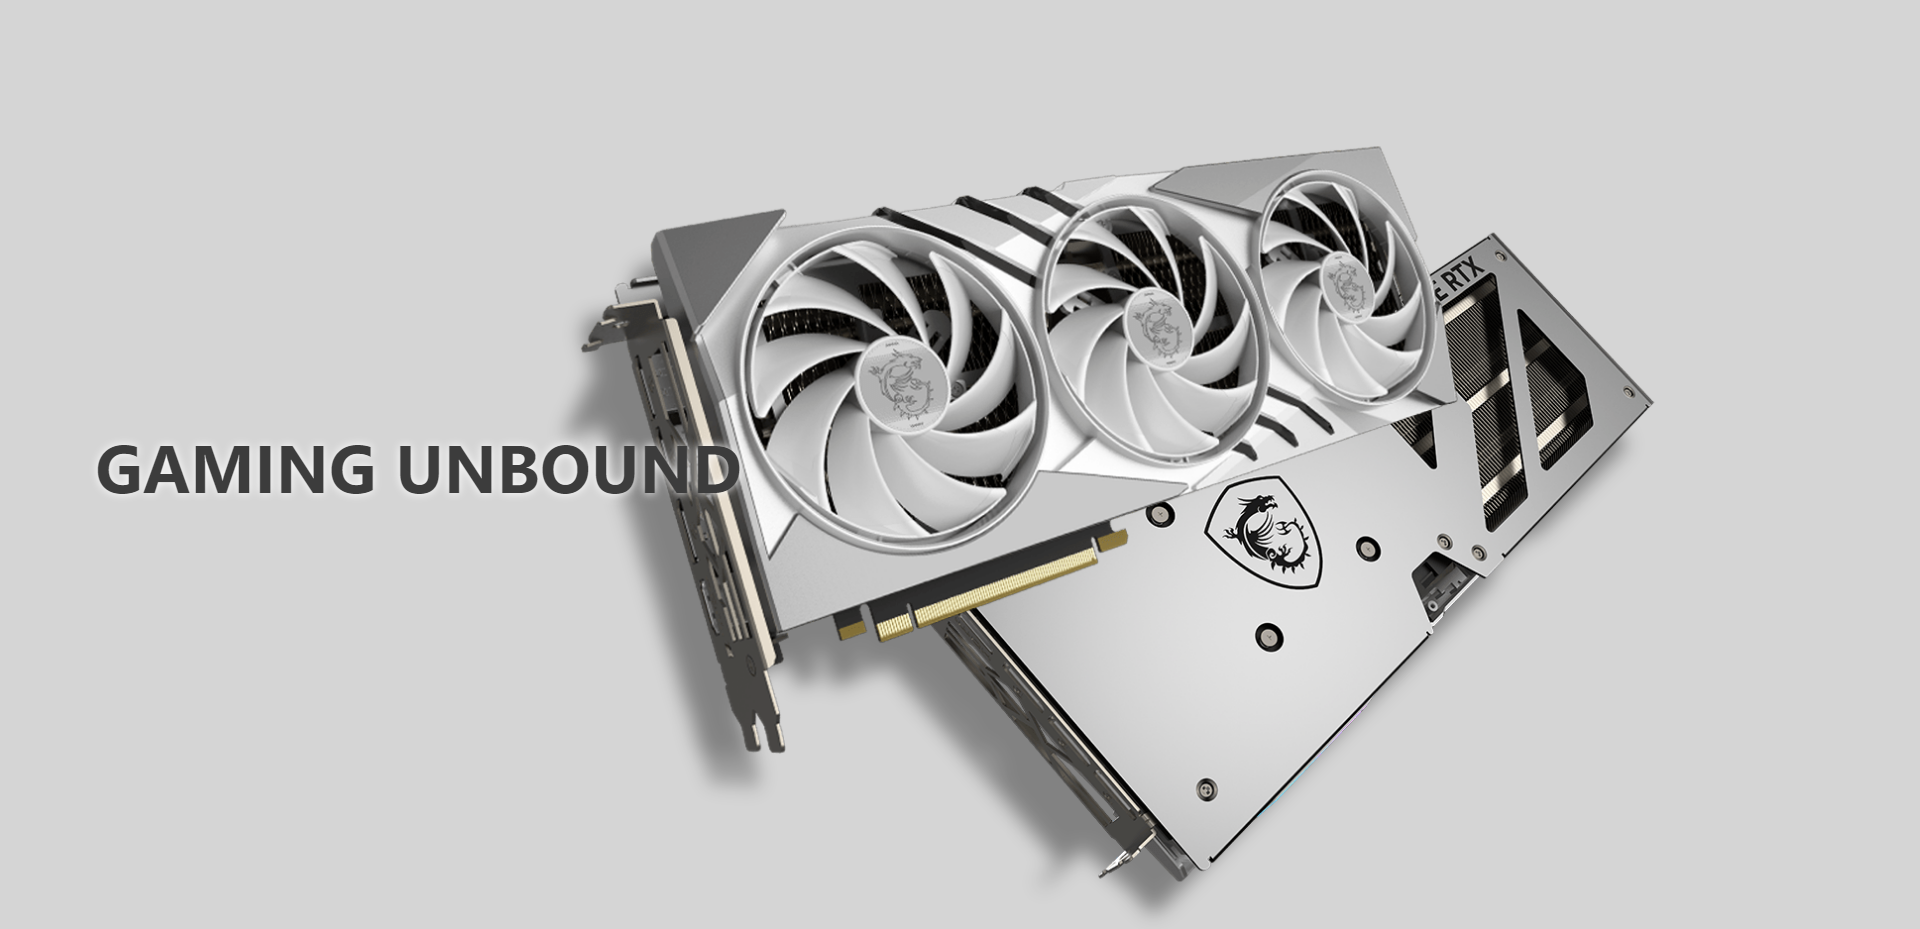 A large marketing image providing additional information about the product MSI GeForce RTX 4060 Ti Gaming X Slim 16GB GDDR6 - White  - Additional alt info not provided